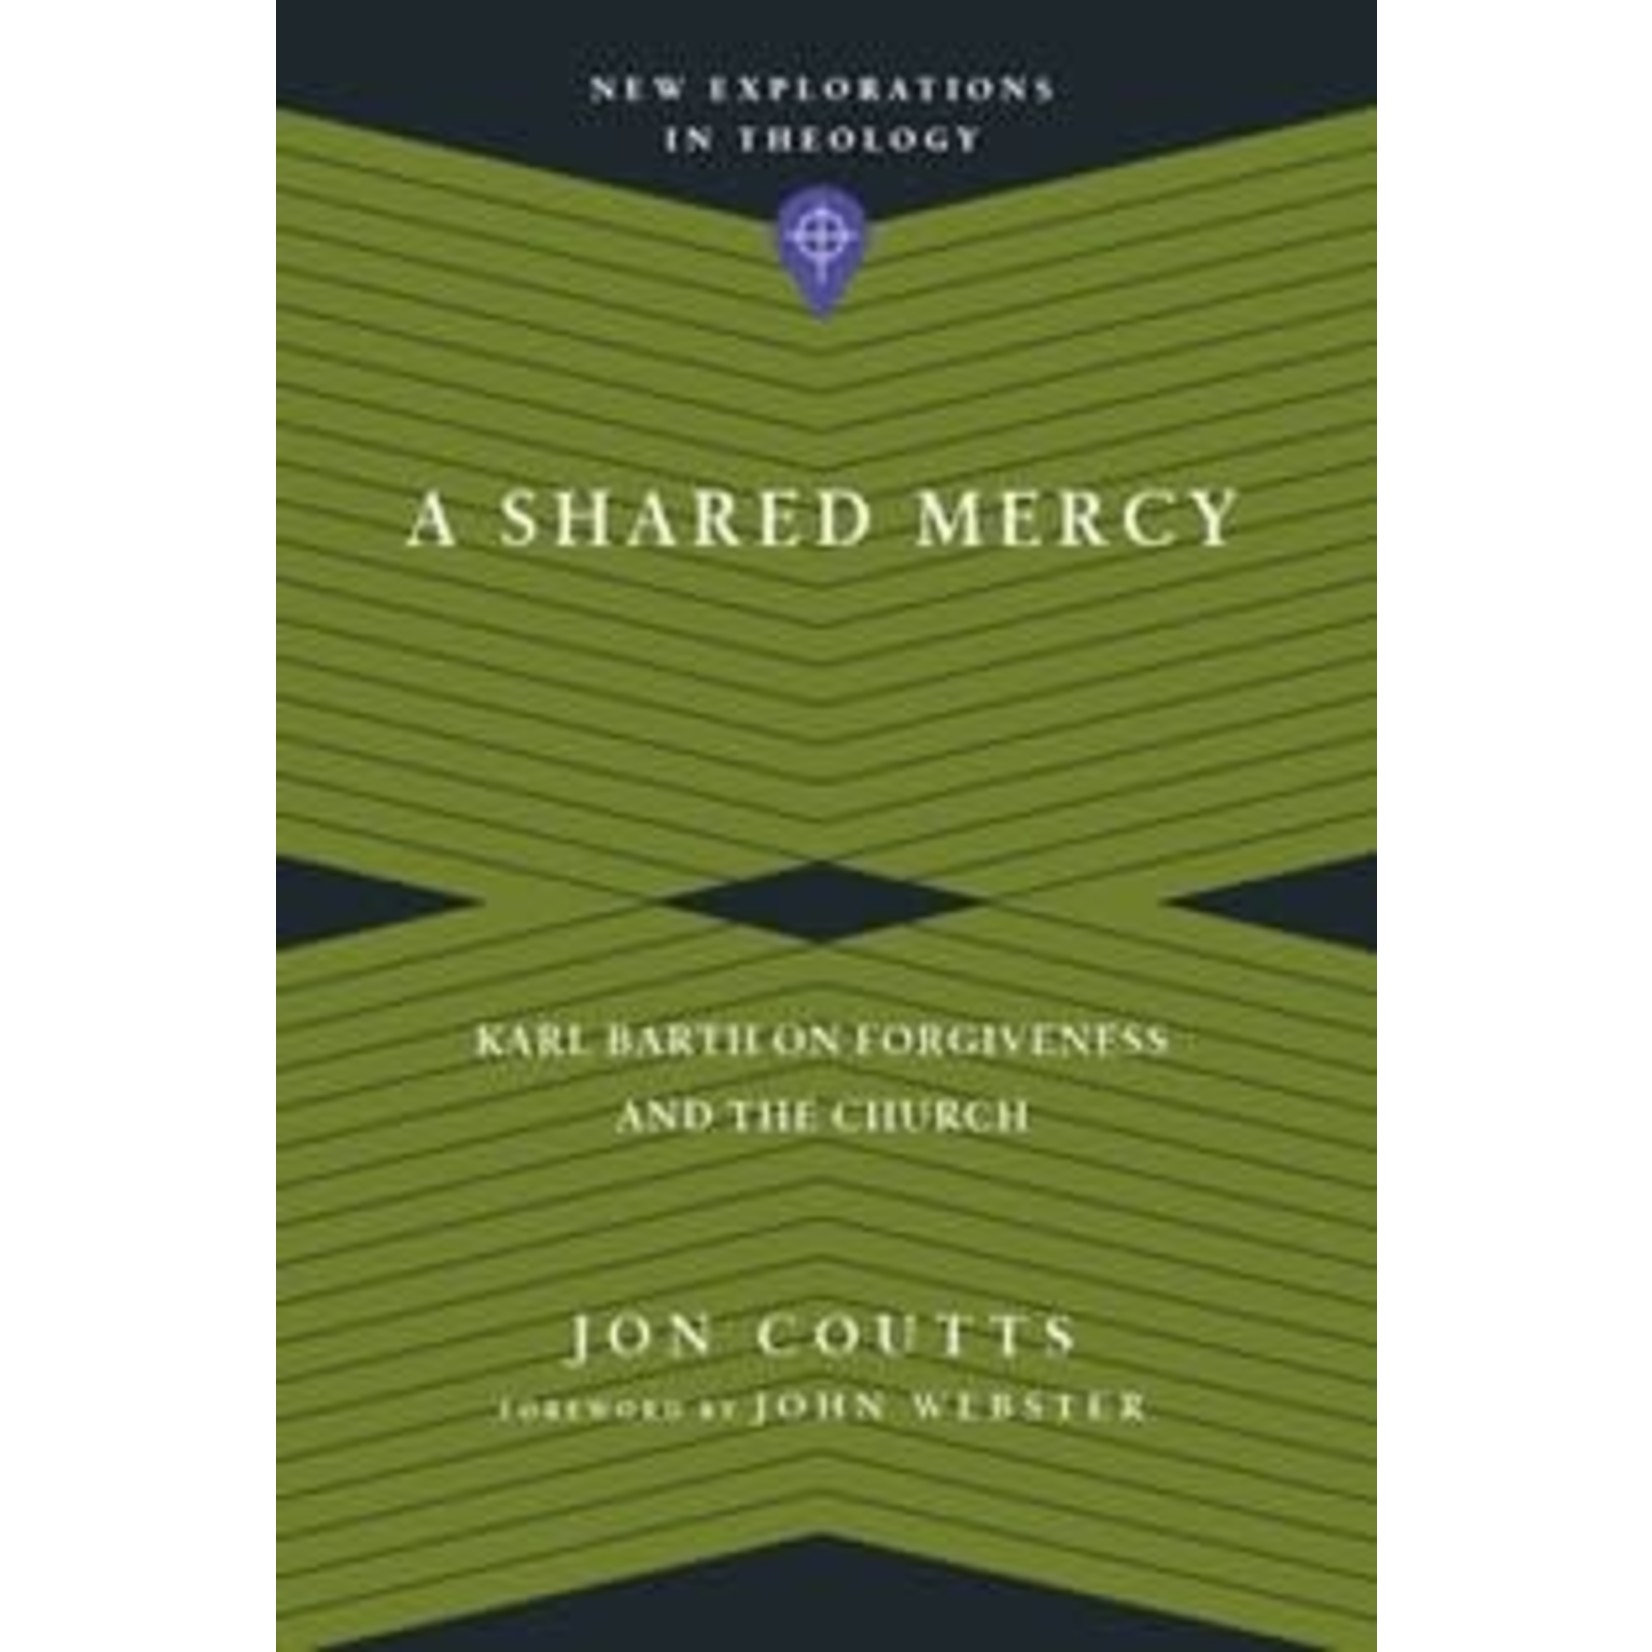 A Shared Mercy - Jon Coutts